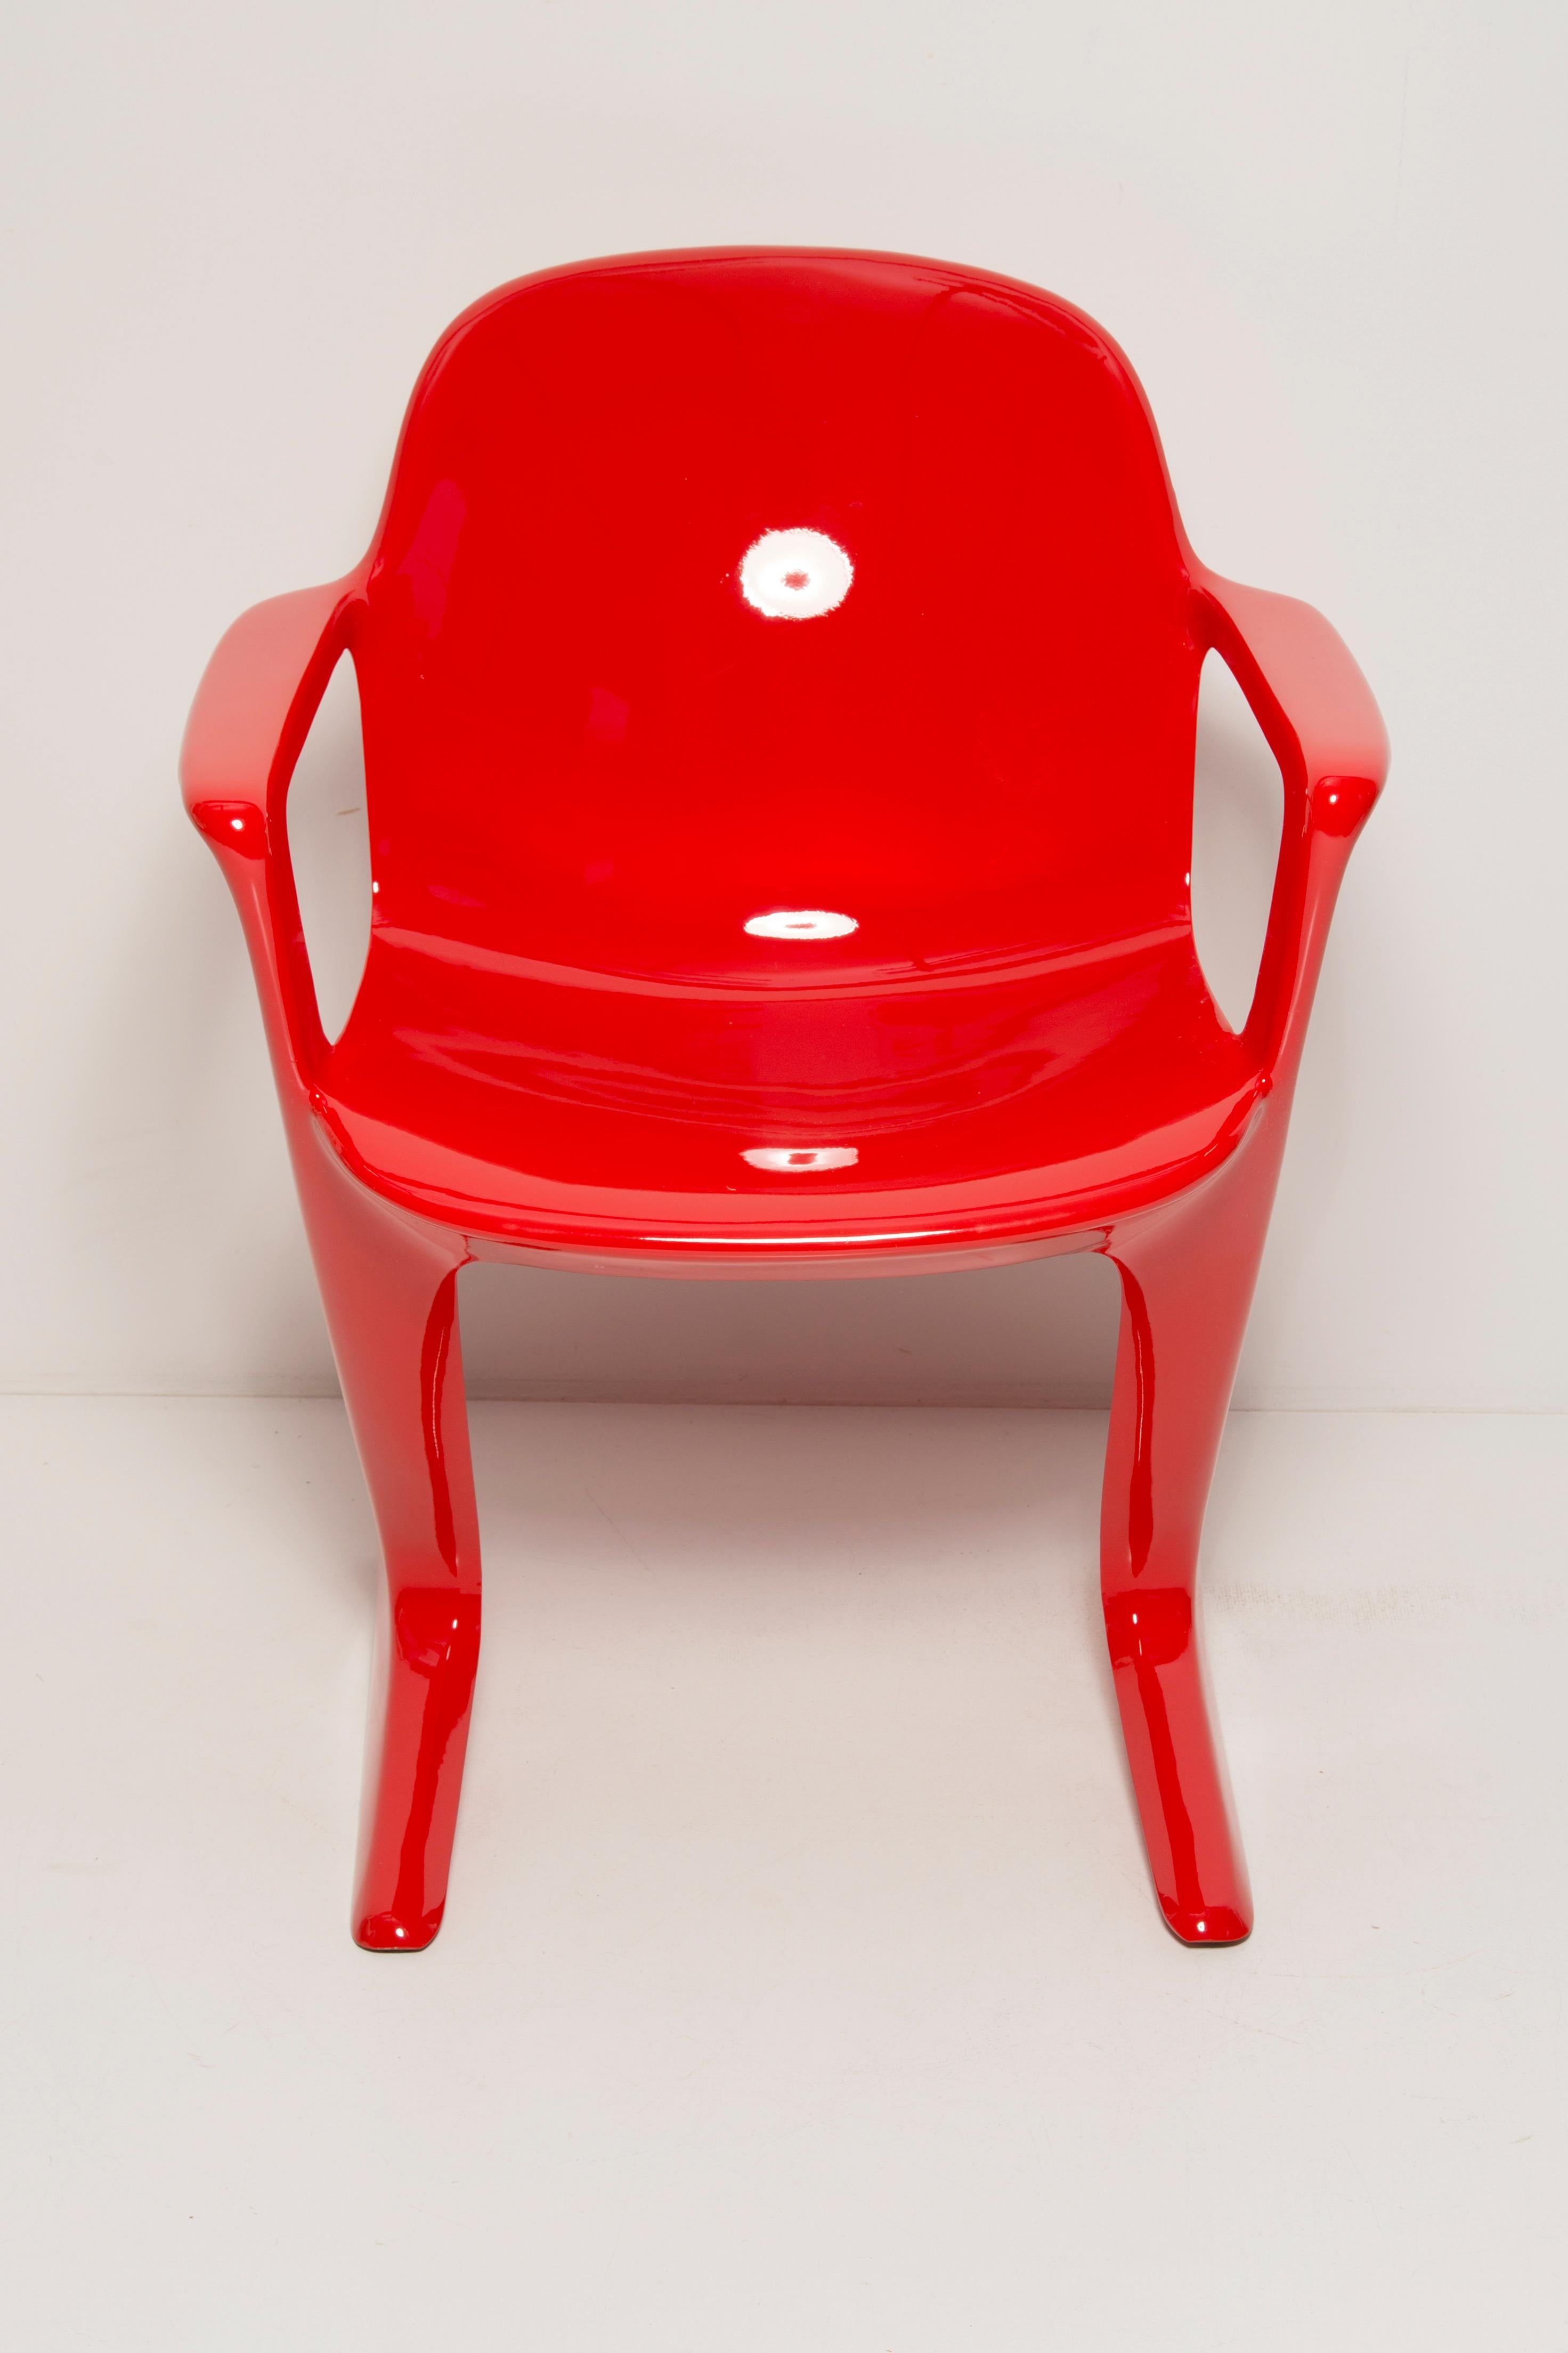 Midcentury Signal Red Kangaroo Chair Designed by Ernst Moeckl, Germany, 1968 For Sale 3